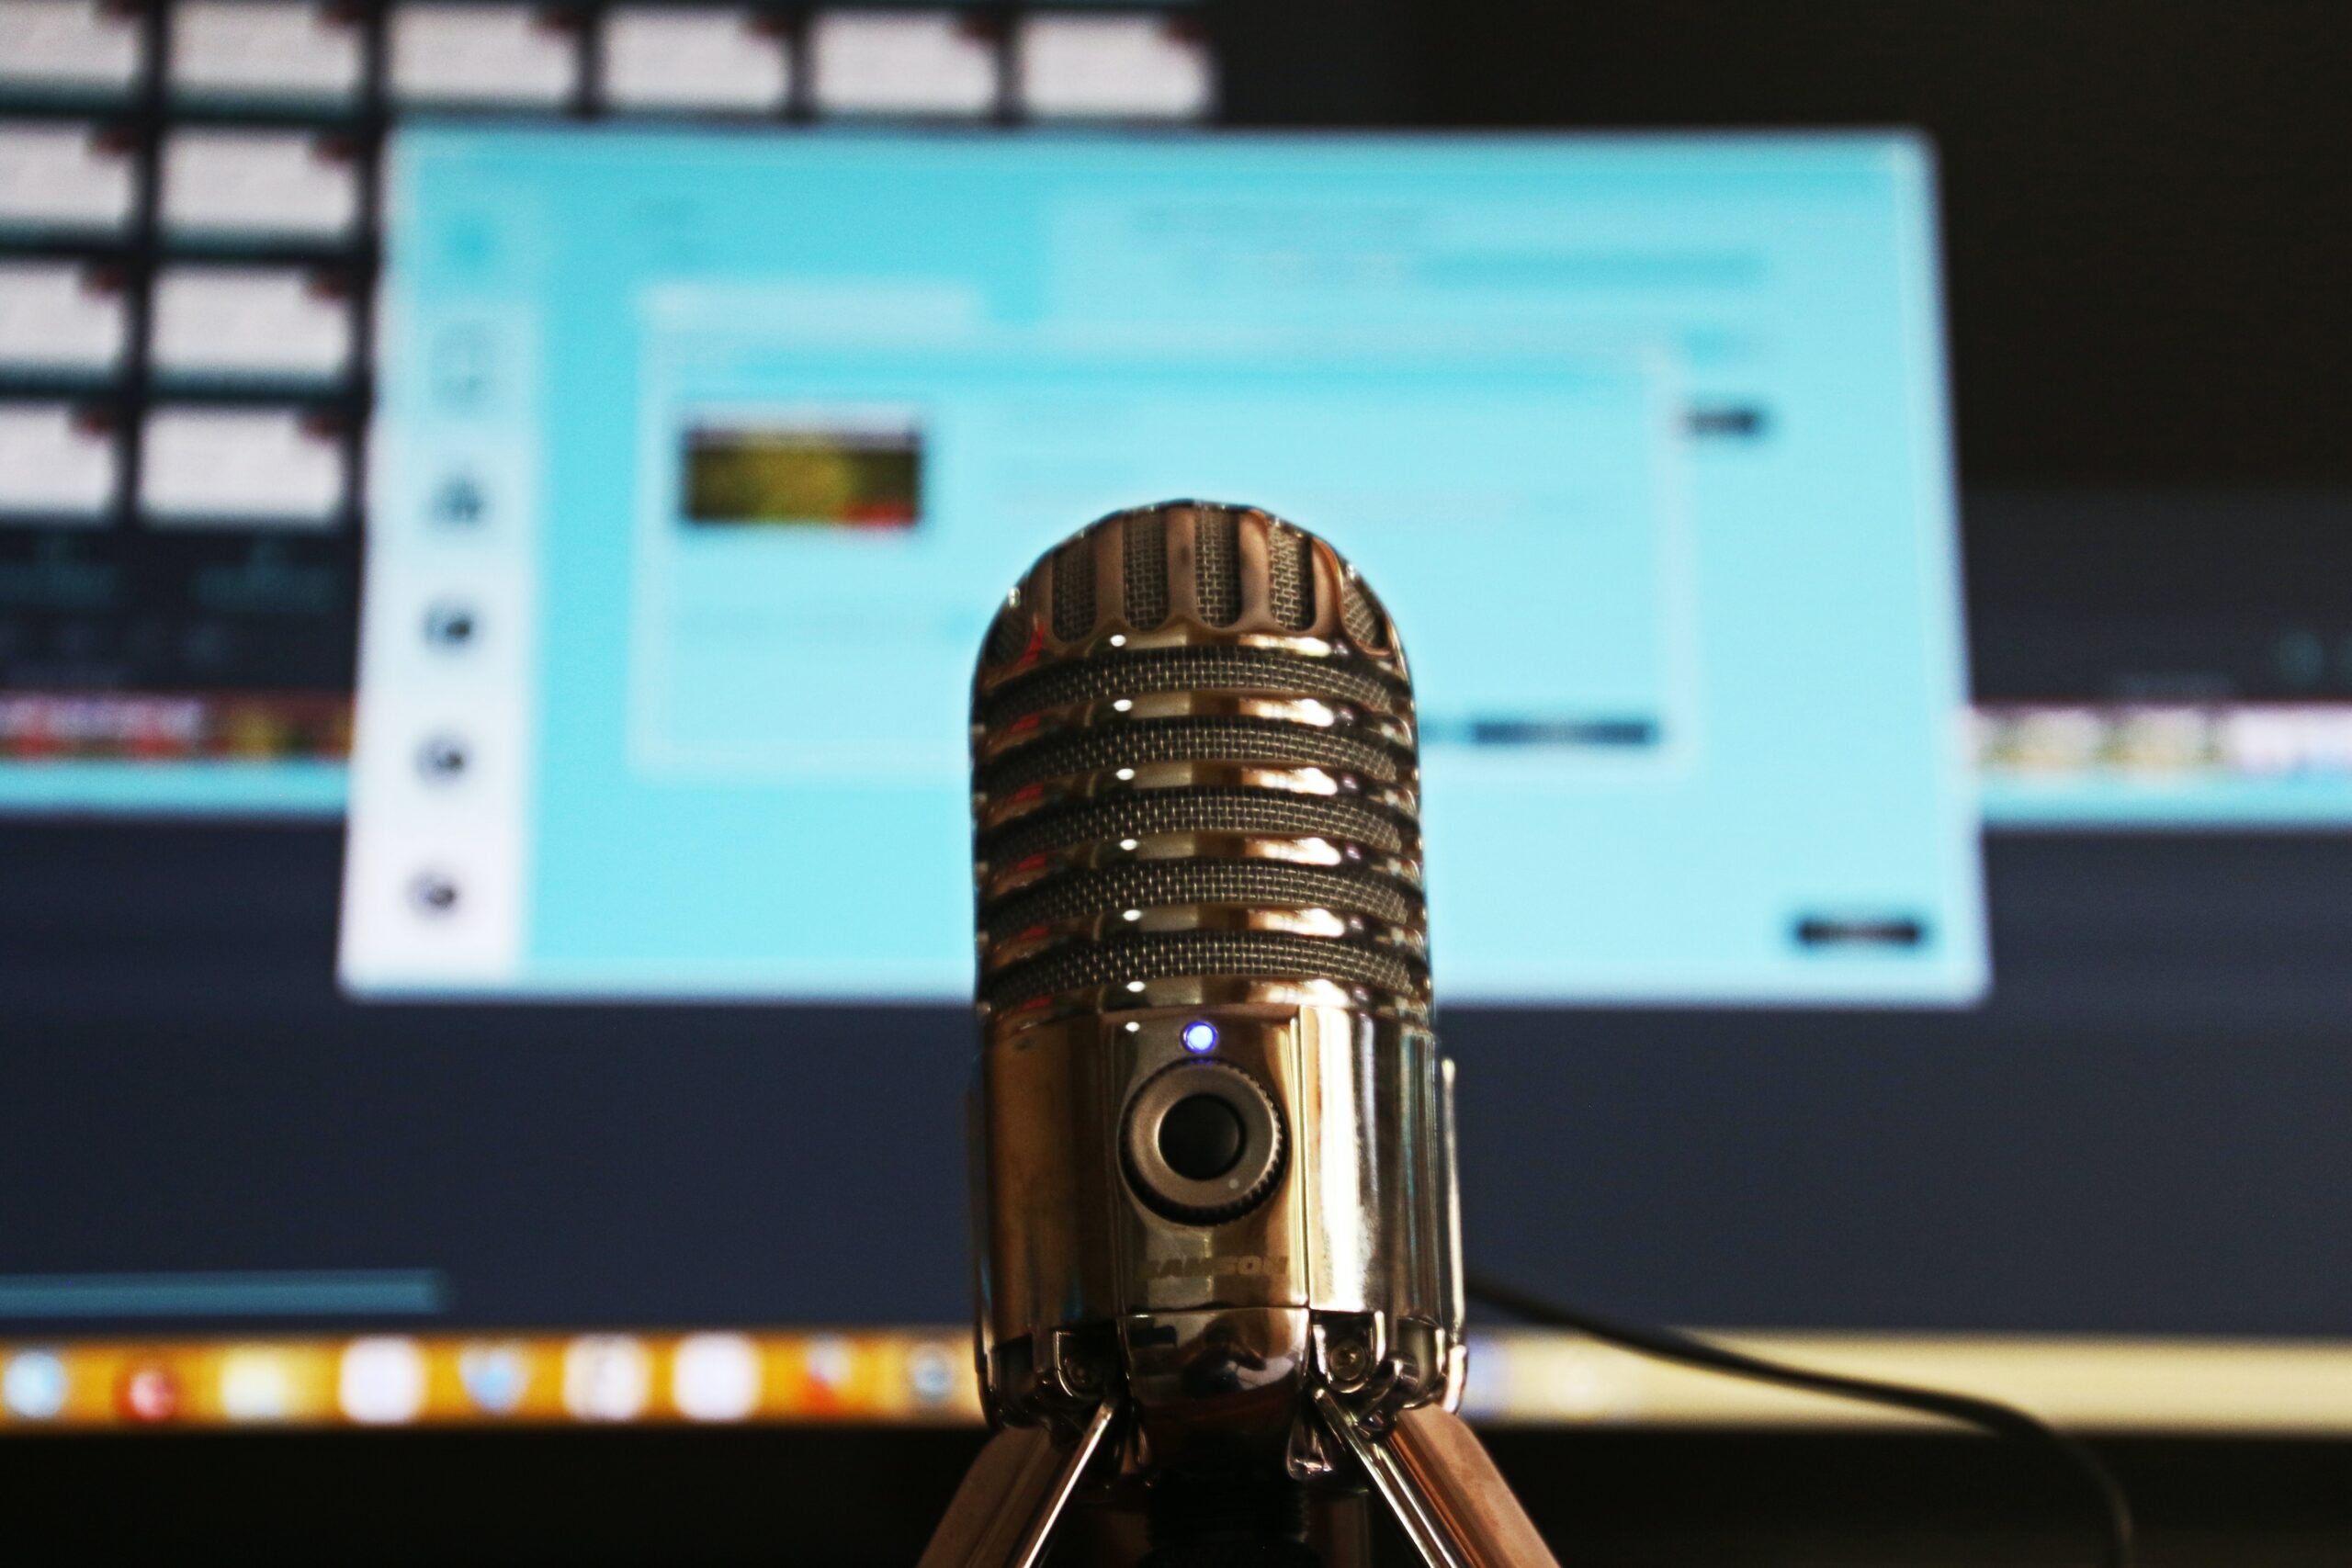 A photo of a microphone in front of a computer